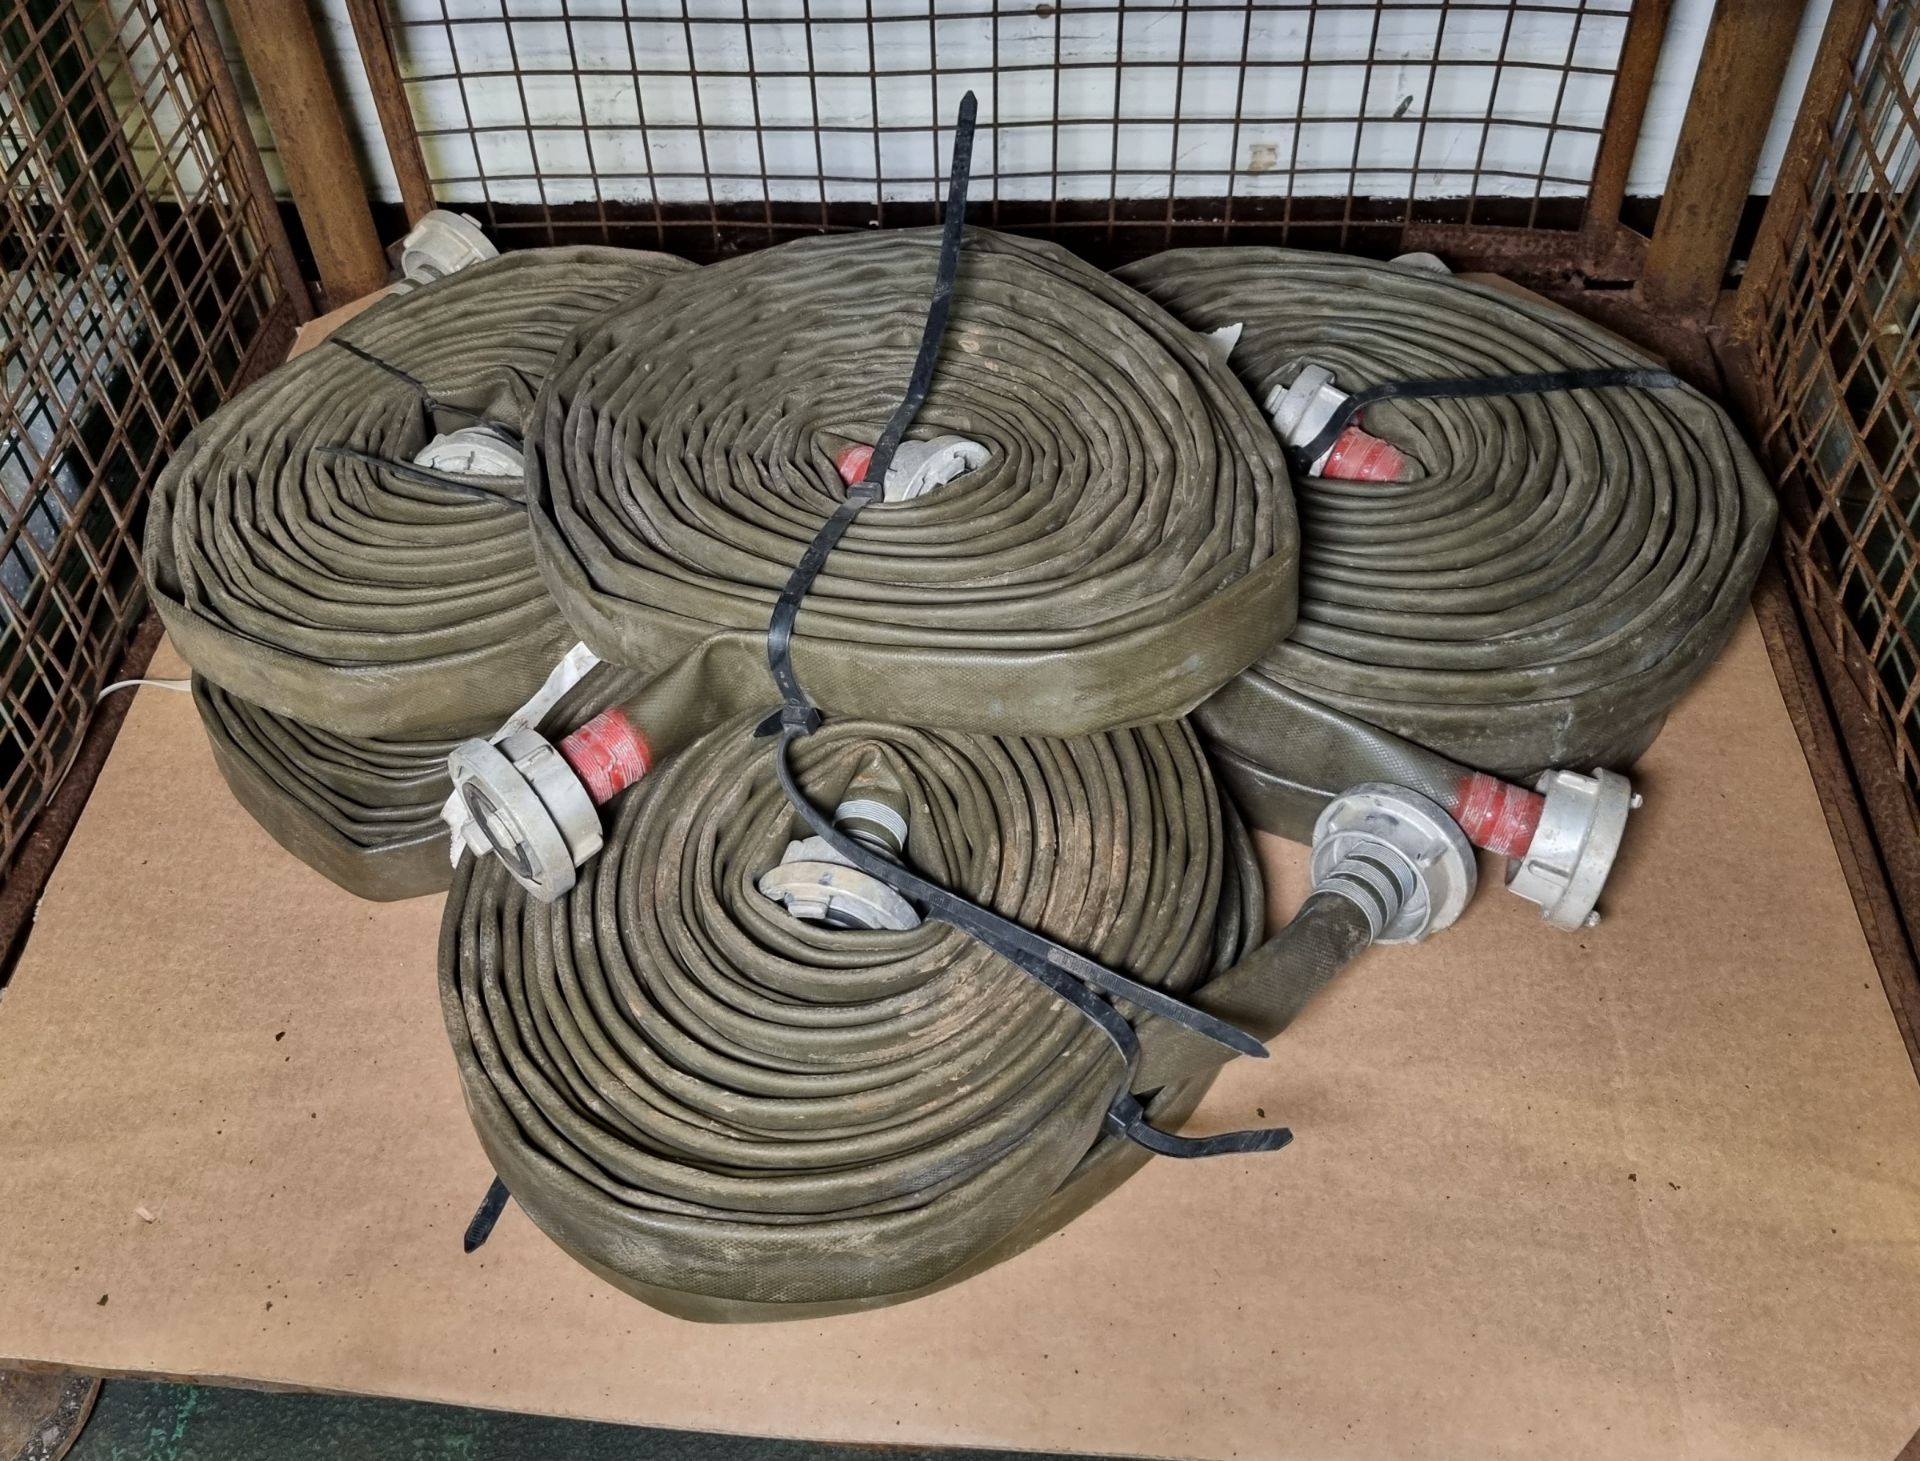 7x Layflat green hose with PVR-1/89 couplings - approx length: 20m, approx diameter: 45mm